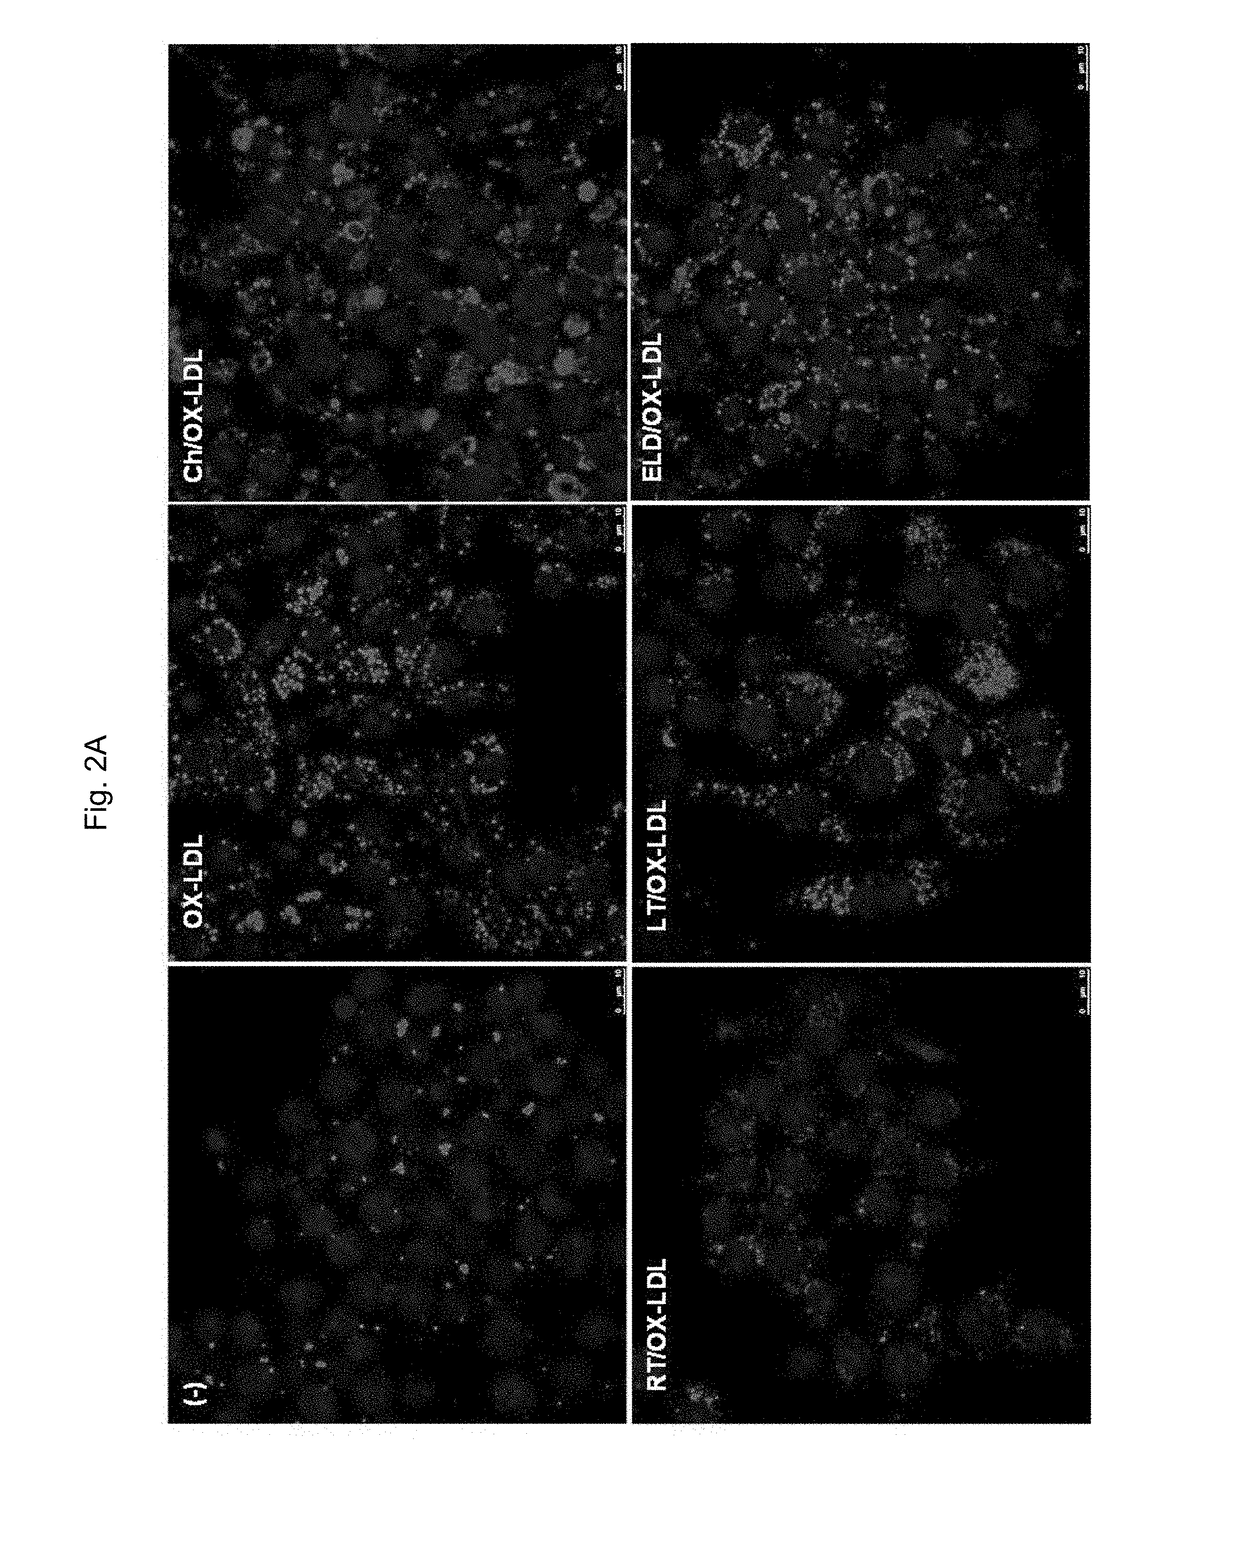 Method of treating macrophage foam cell formation and diseases associated with macrophage foam cell formation